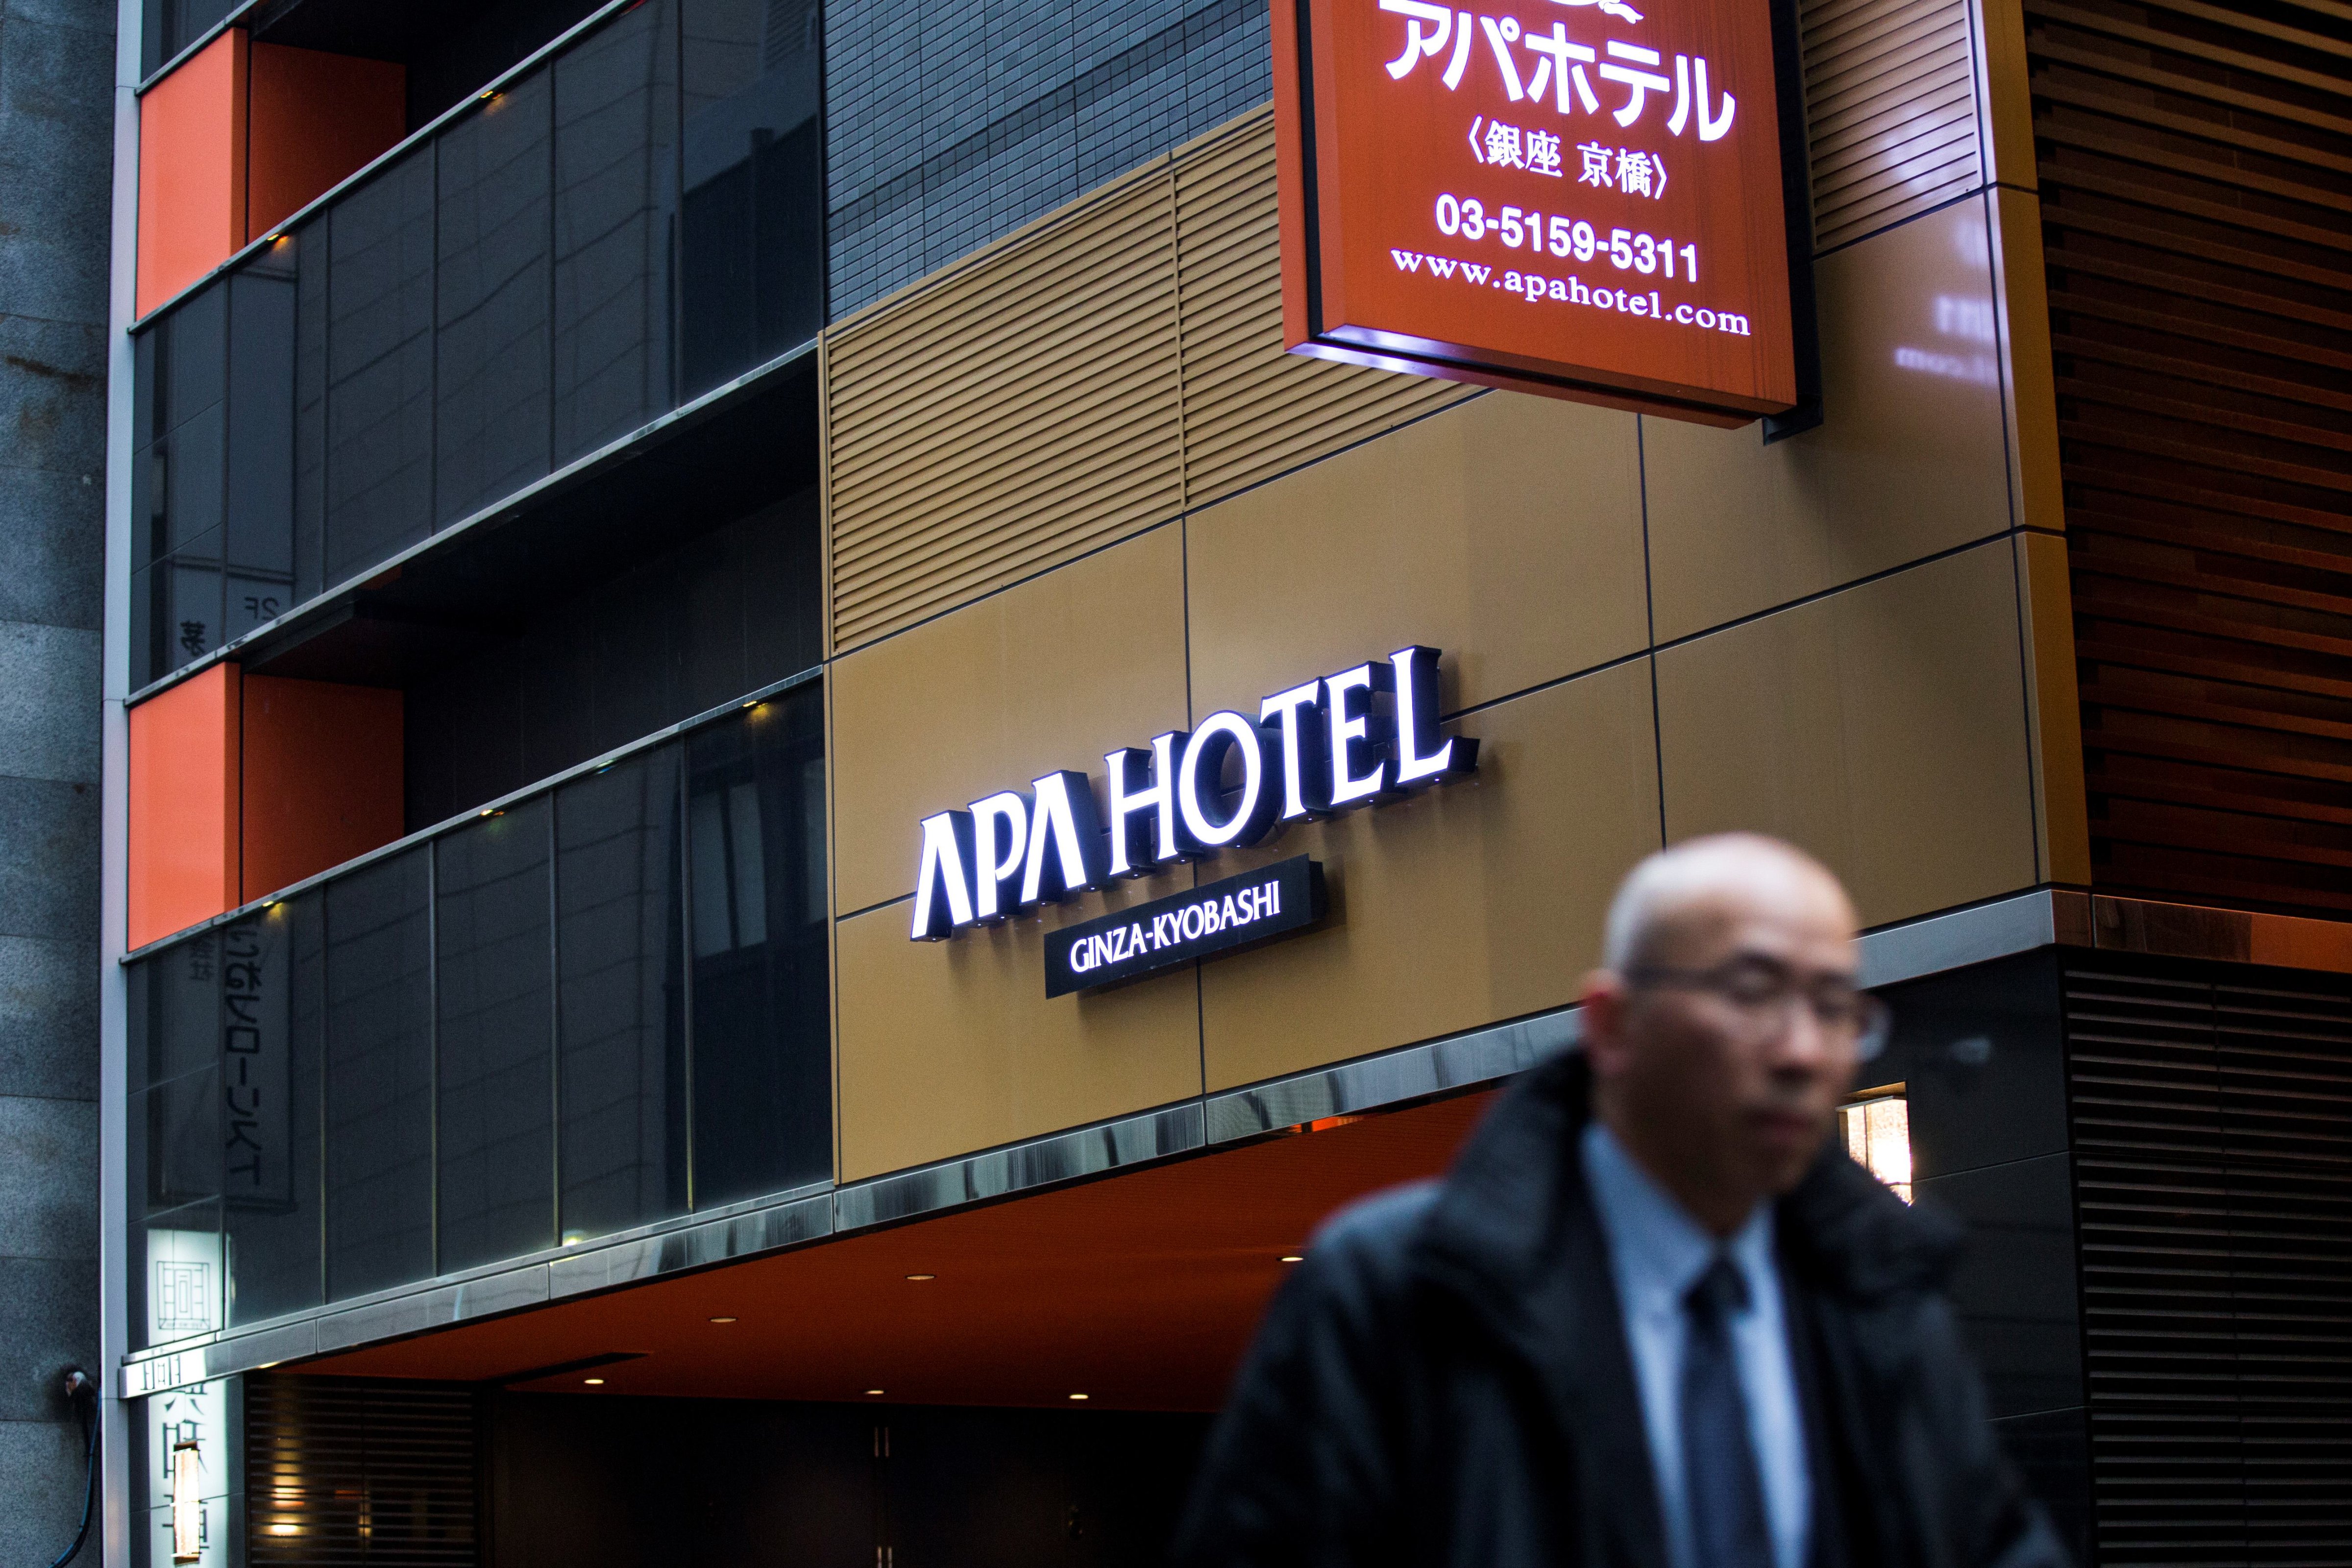 A man walks past the entrance of an APA hotel in central Tokyo on Jan. 20, 2017 (Behrouz Mehri—AFP/Getty Images)